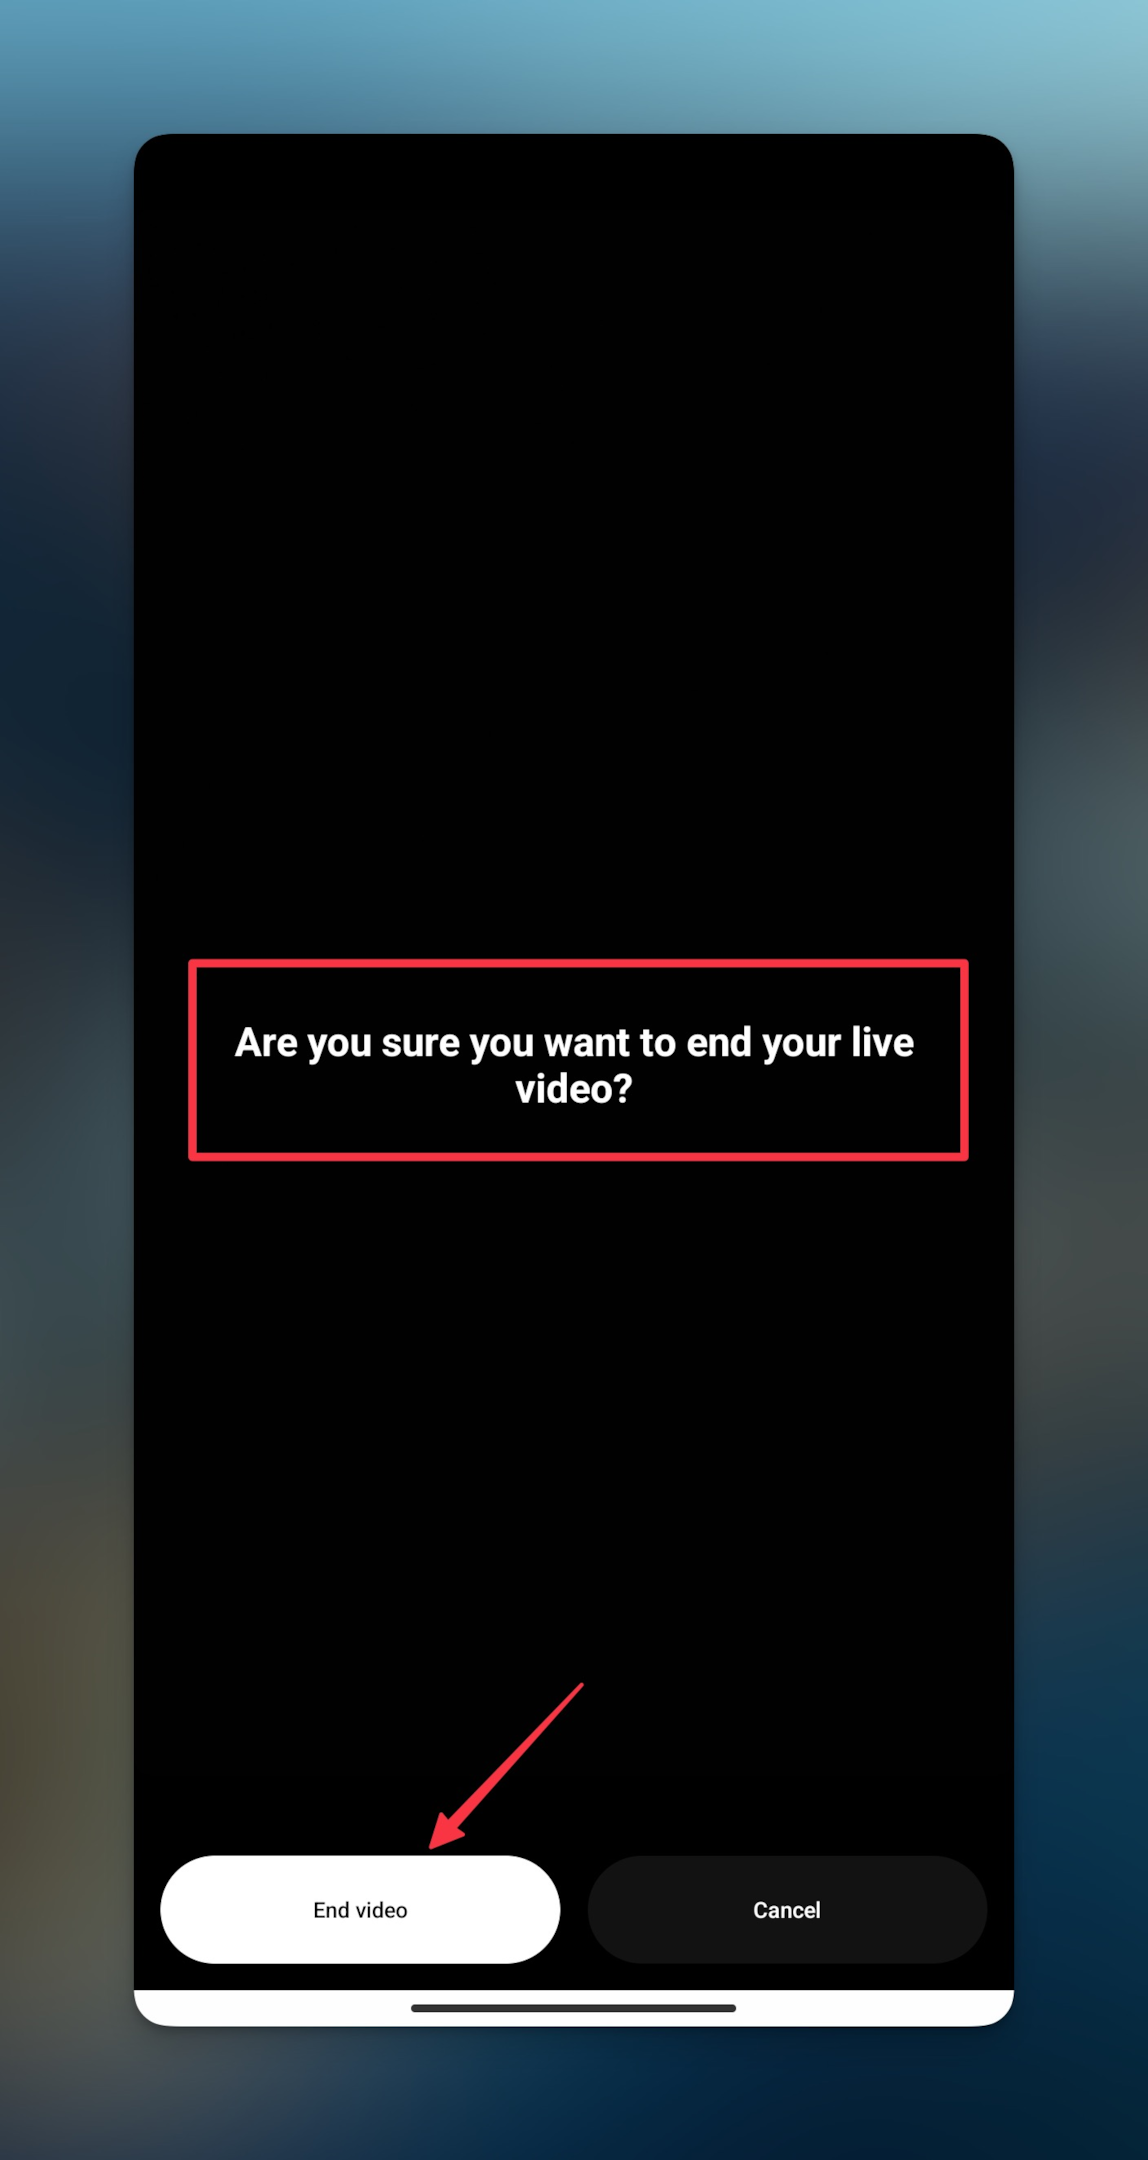 Remote.tools shows the warning messages that Instagram shows when you end the live streaming. Instagram will automatically save the the video